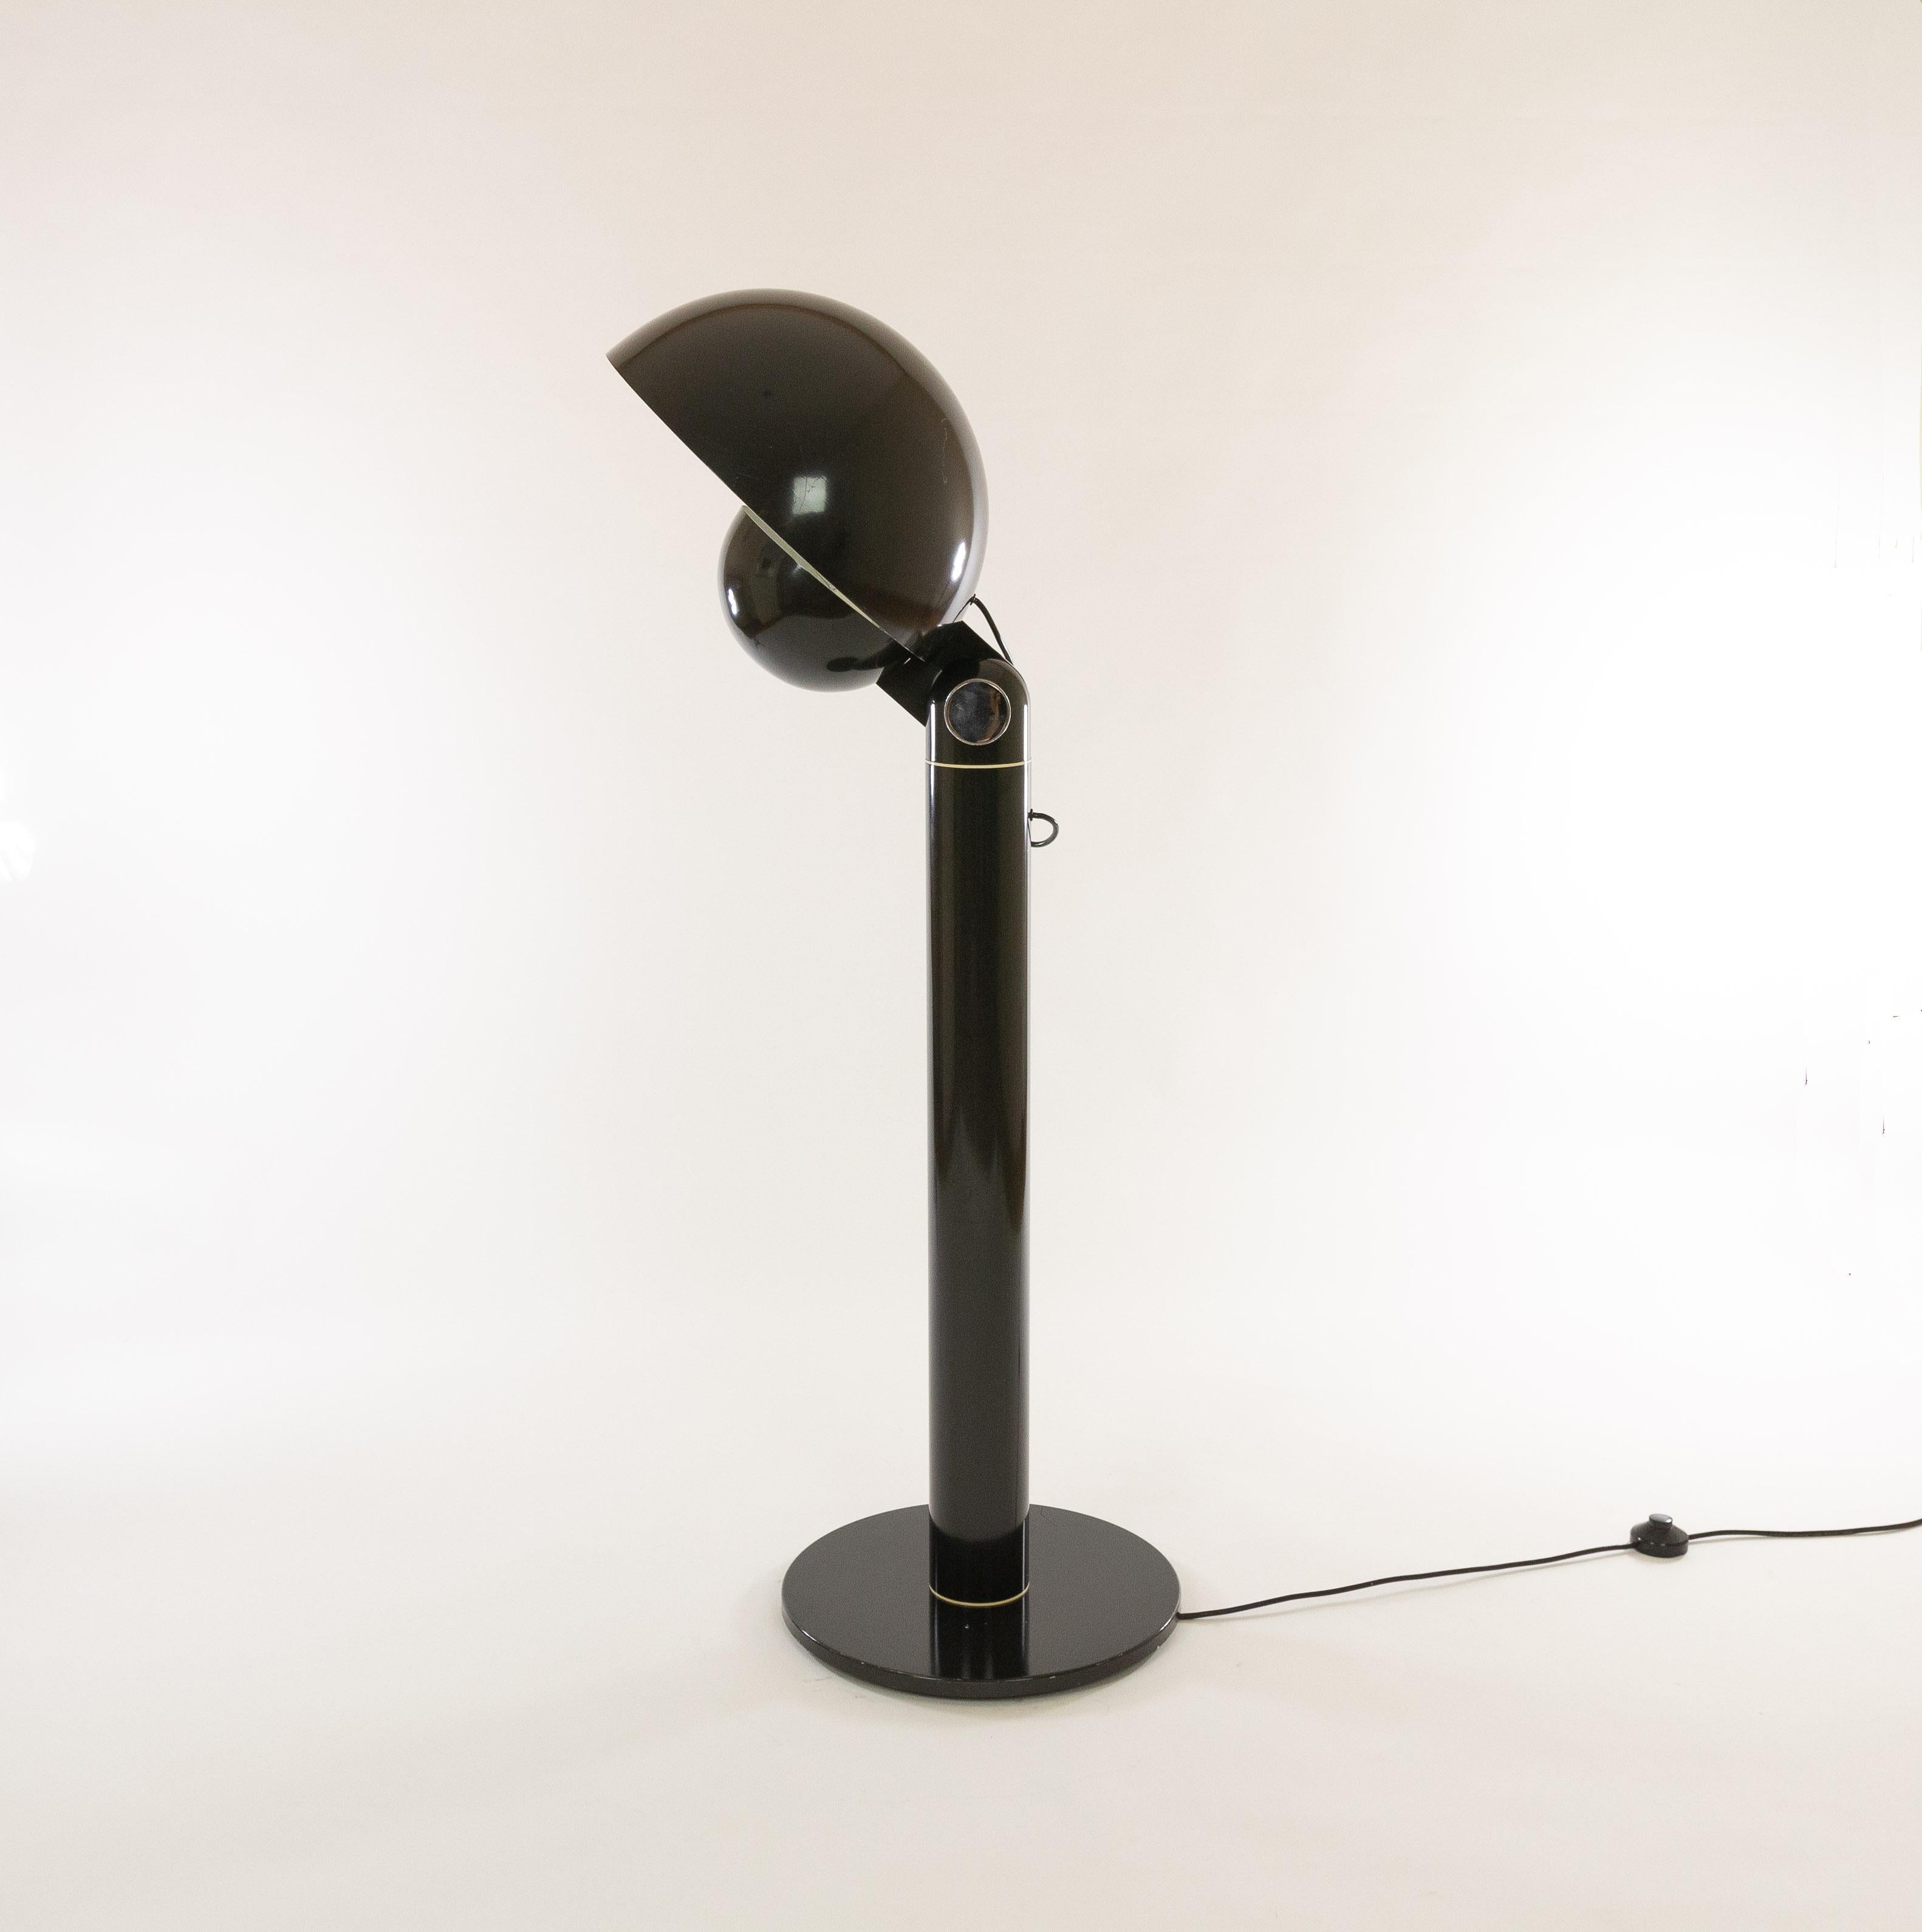 Black Cuffia floor lamp designed by Francesco Buzzi Ceriani in 1969. This early version was produced by Francesconi.

The lamp has two hemispherical reflectors; the diameter of the larger part is twice as large as the smaller one (Ø 40 cm vs Ø 20